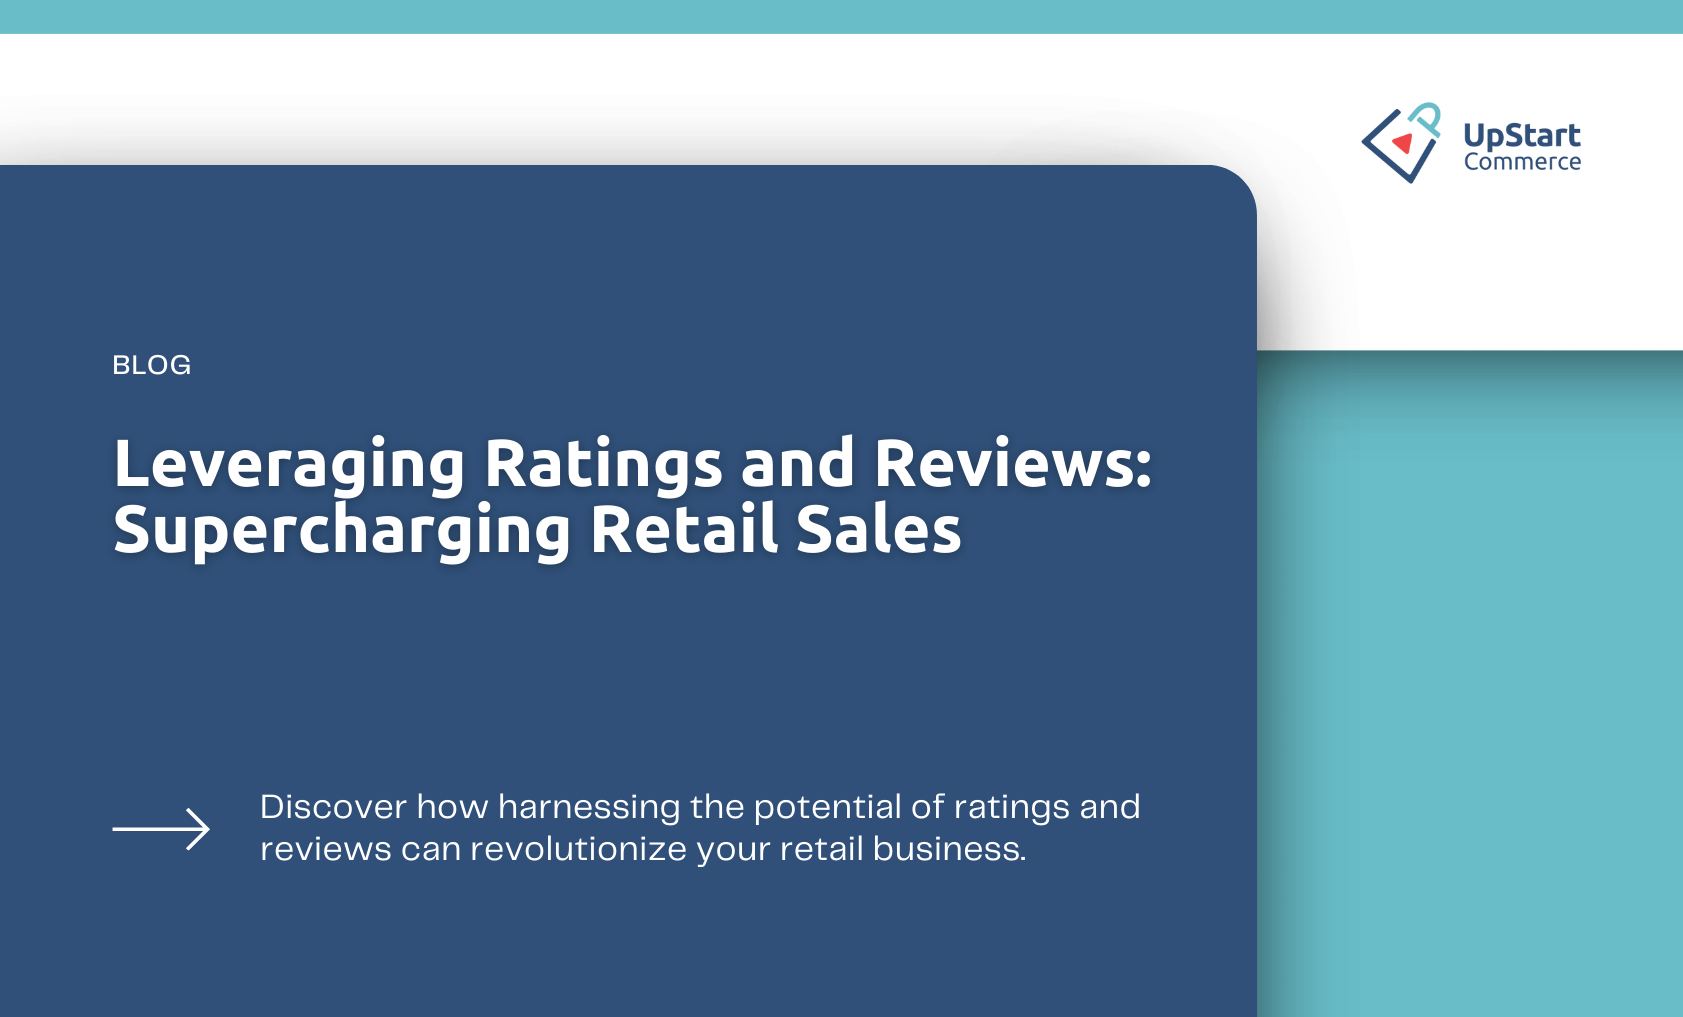 Leveraging Ratings and Reviews: Boosts Retail Sales